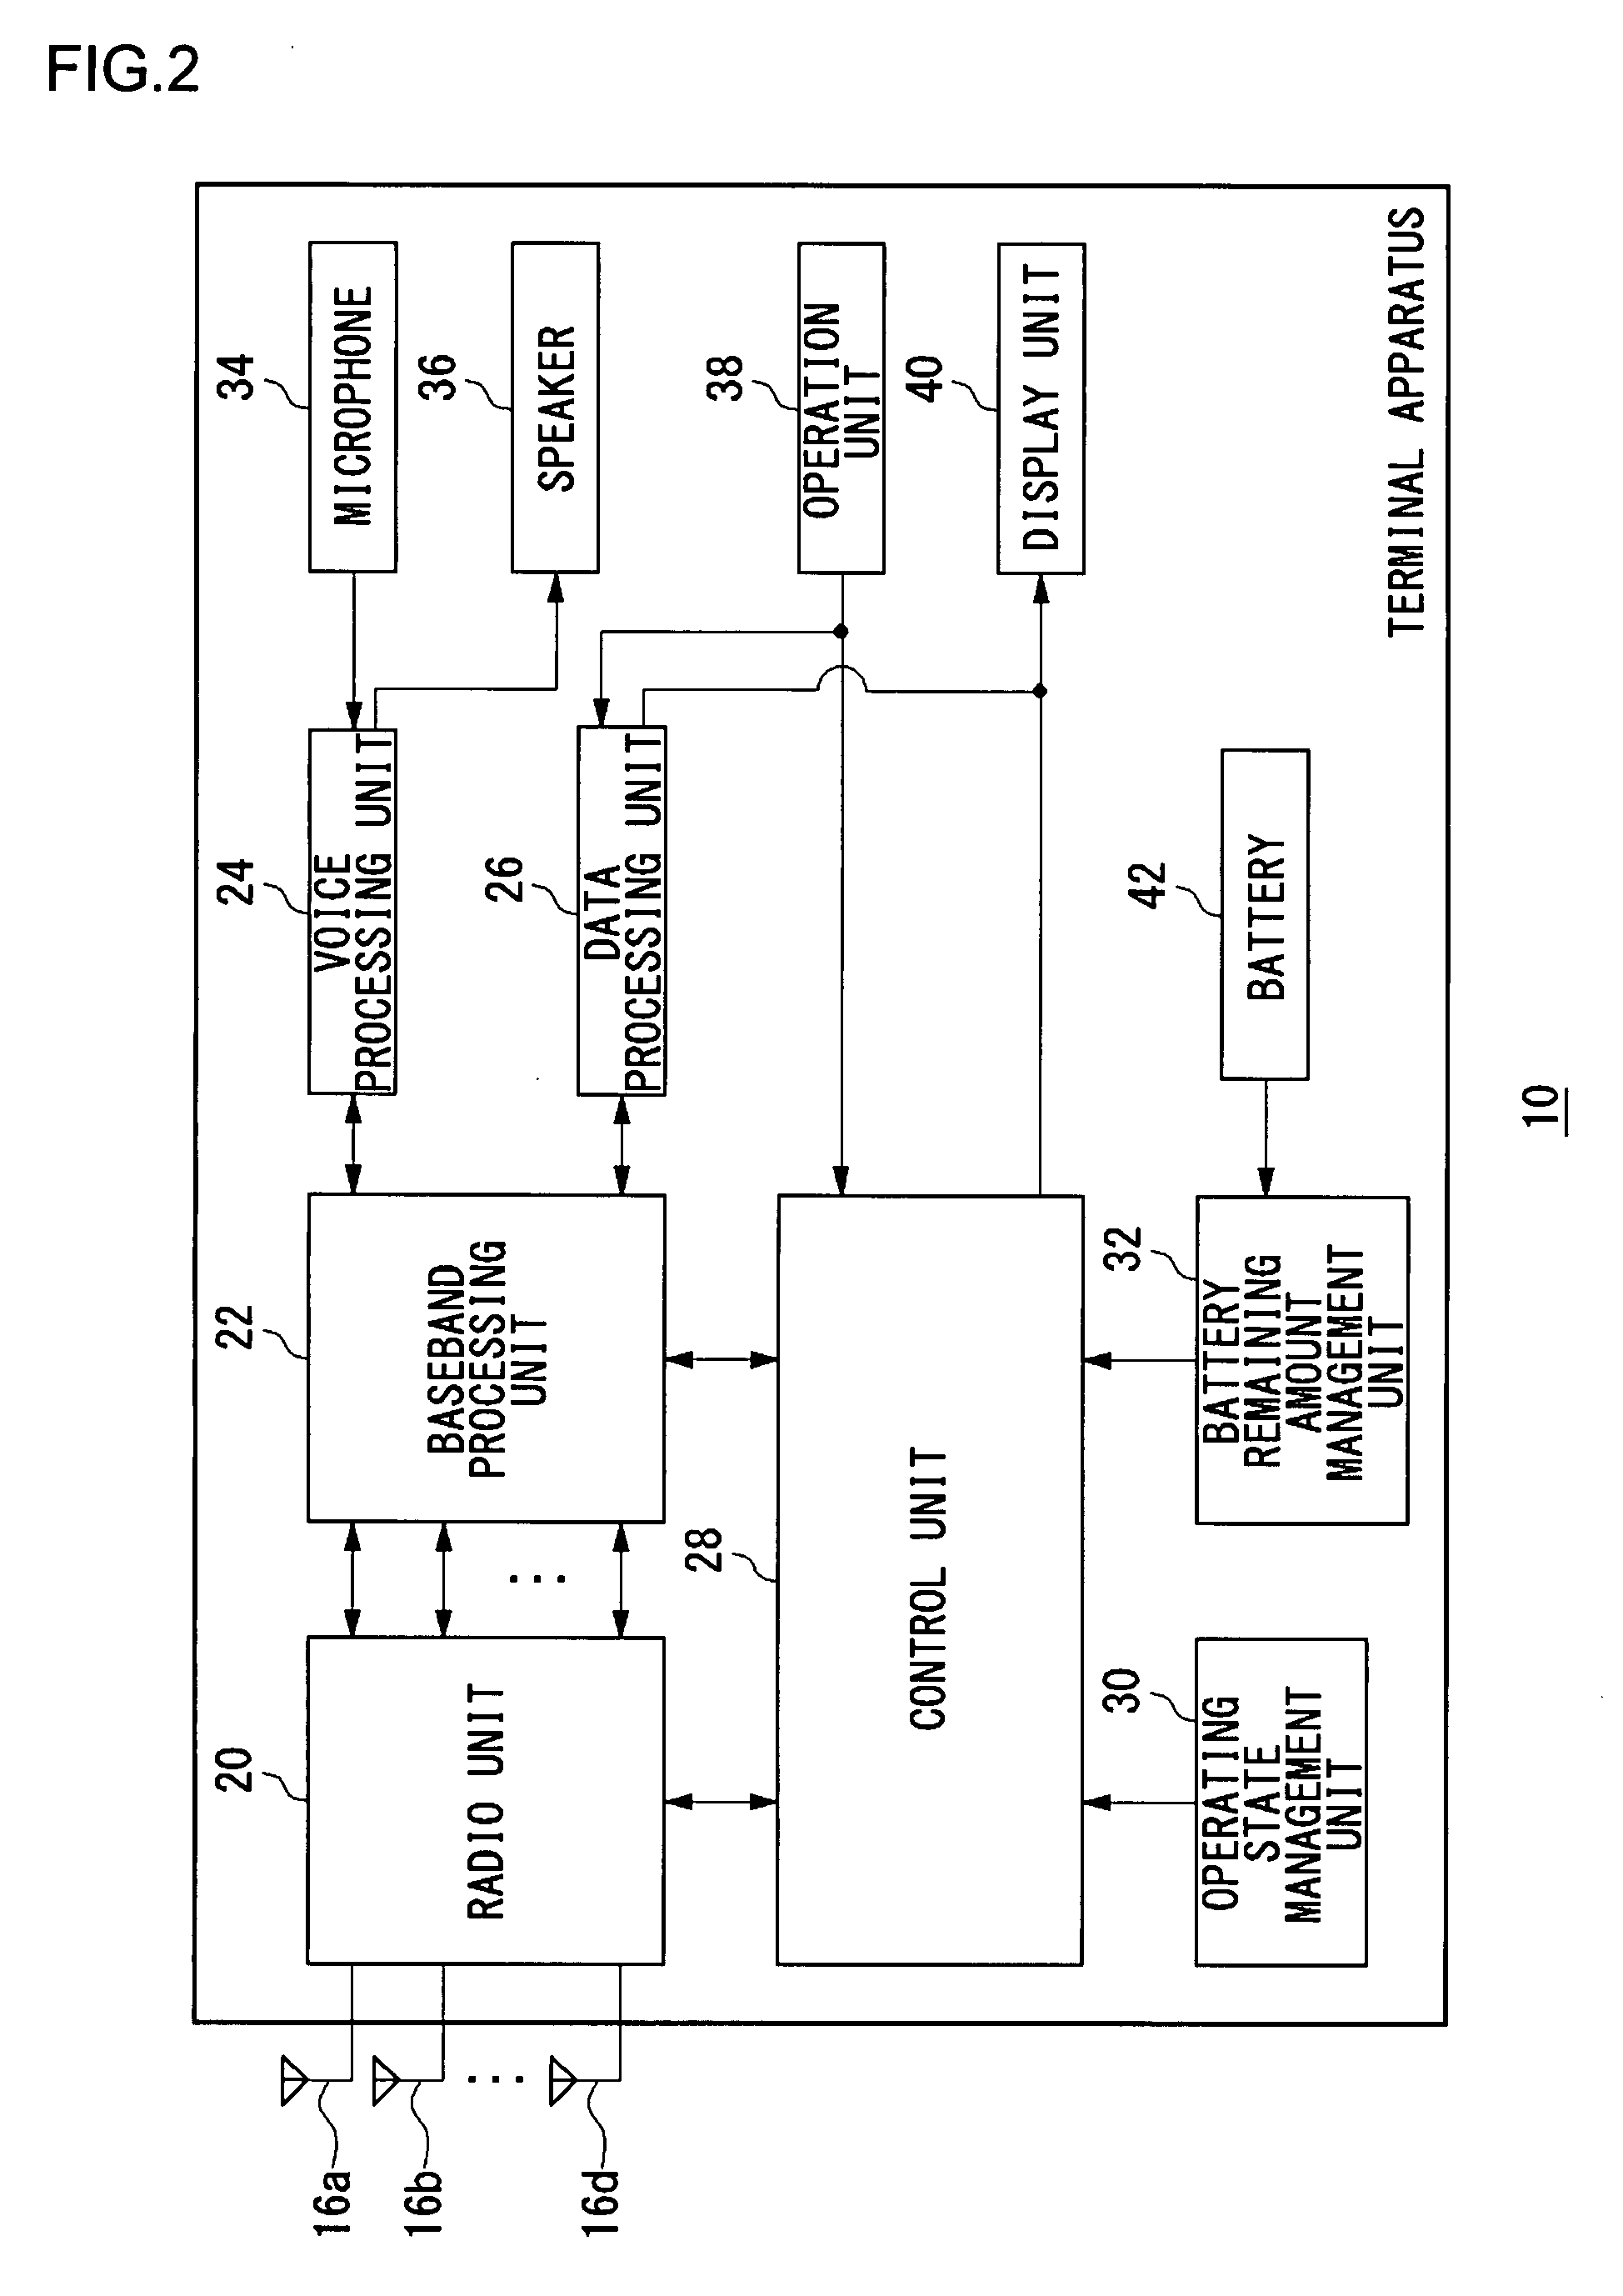 Method for controlling standby operations compatible with a plurality of wireless communication systems and method for performing operations compatible with a plurality of wireless communication systems